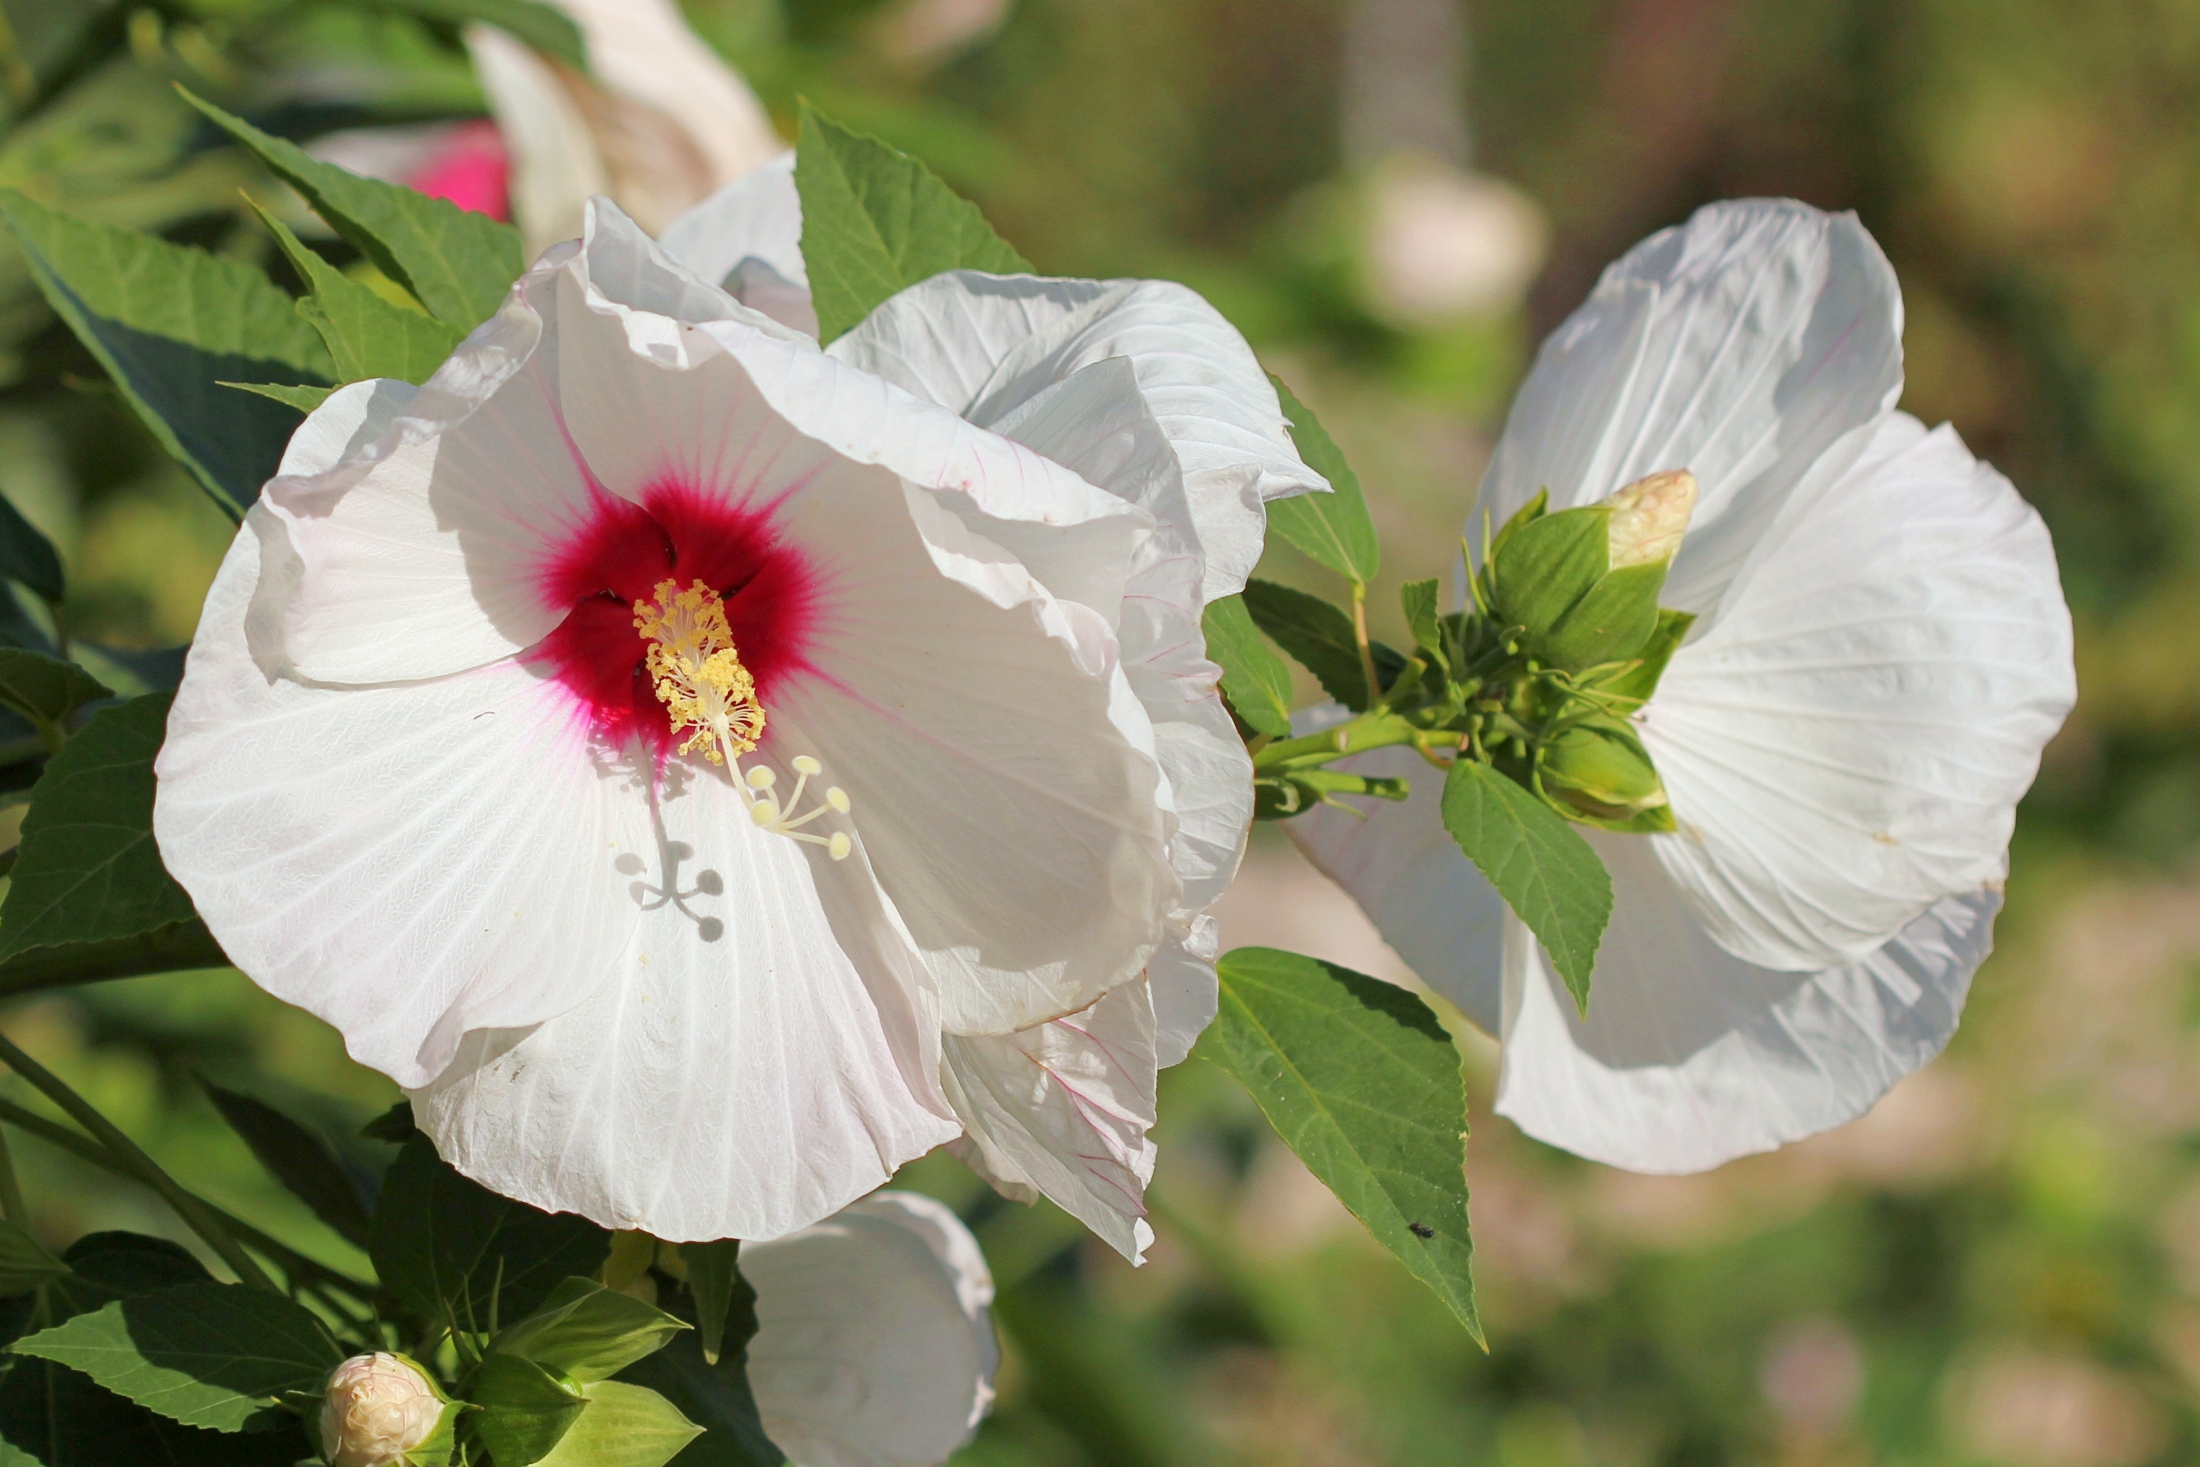 Hibiscus How To Plant Grow And Care For Rose Of Sharon Plants The Old Farmer S Almanac,Cooking Chestnuts On A Fire